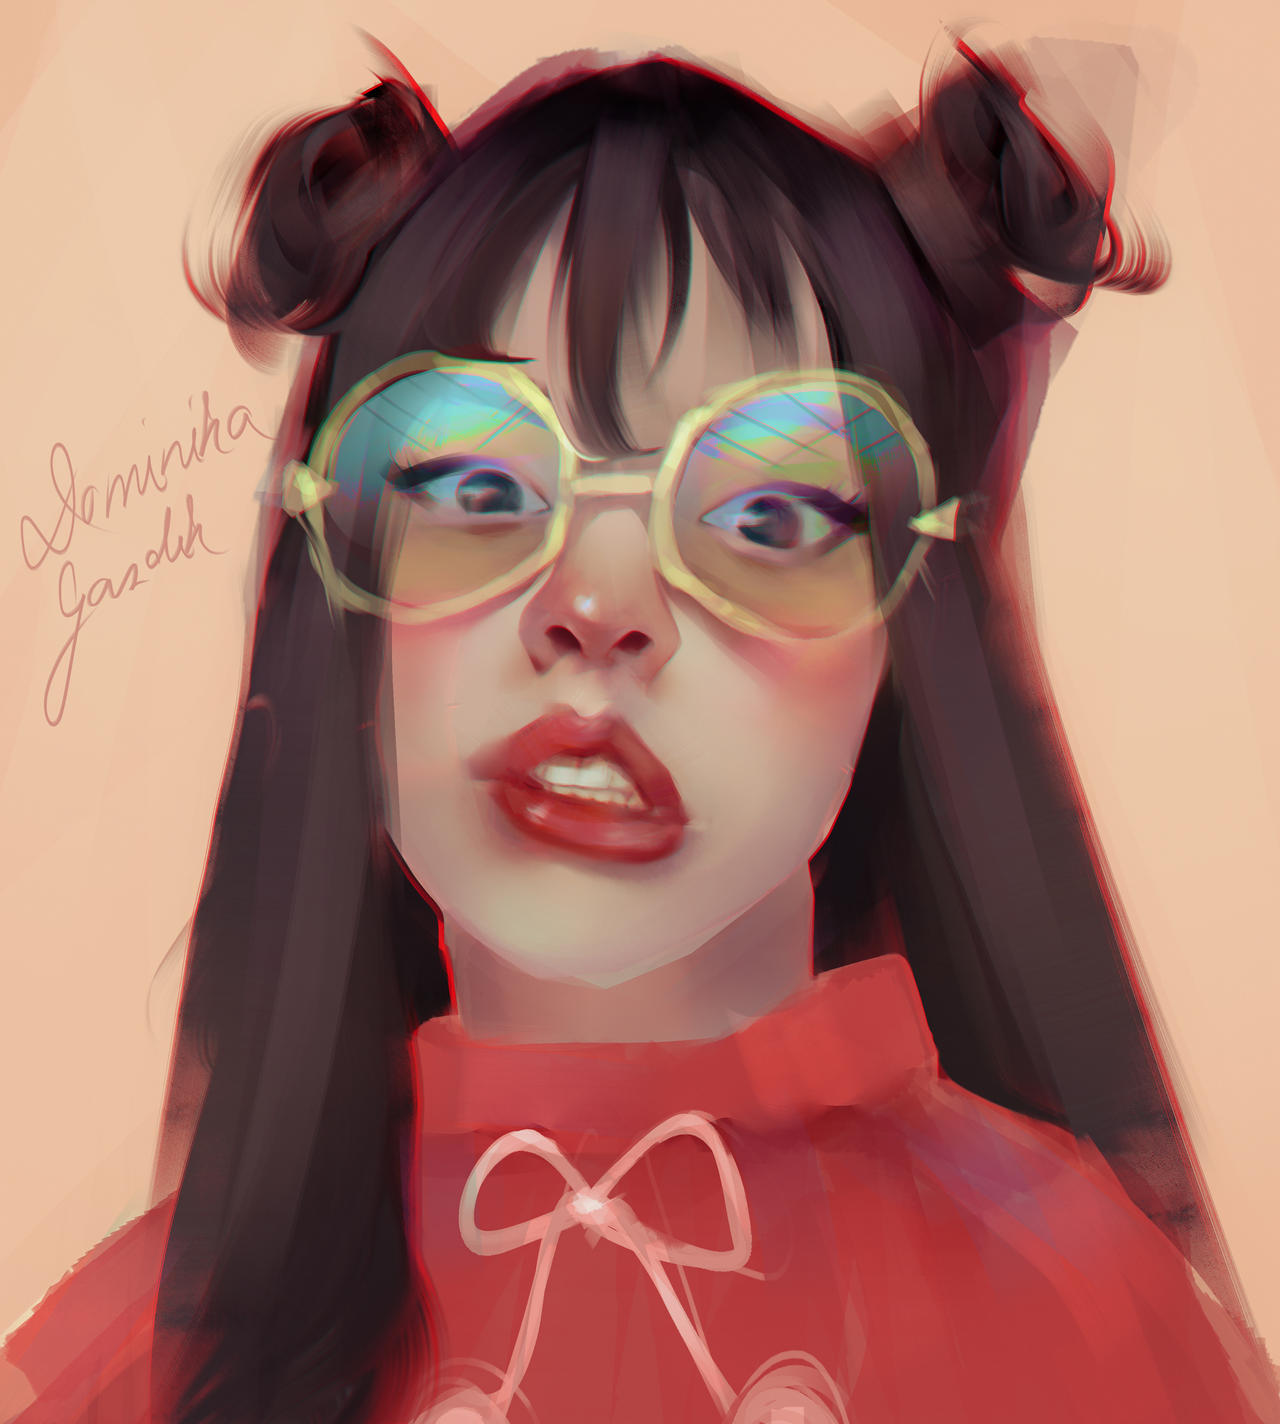 Portrait Asian Girl by TinyTruc on DeviantArt